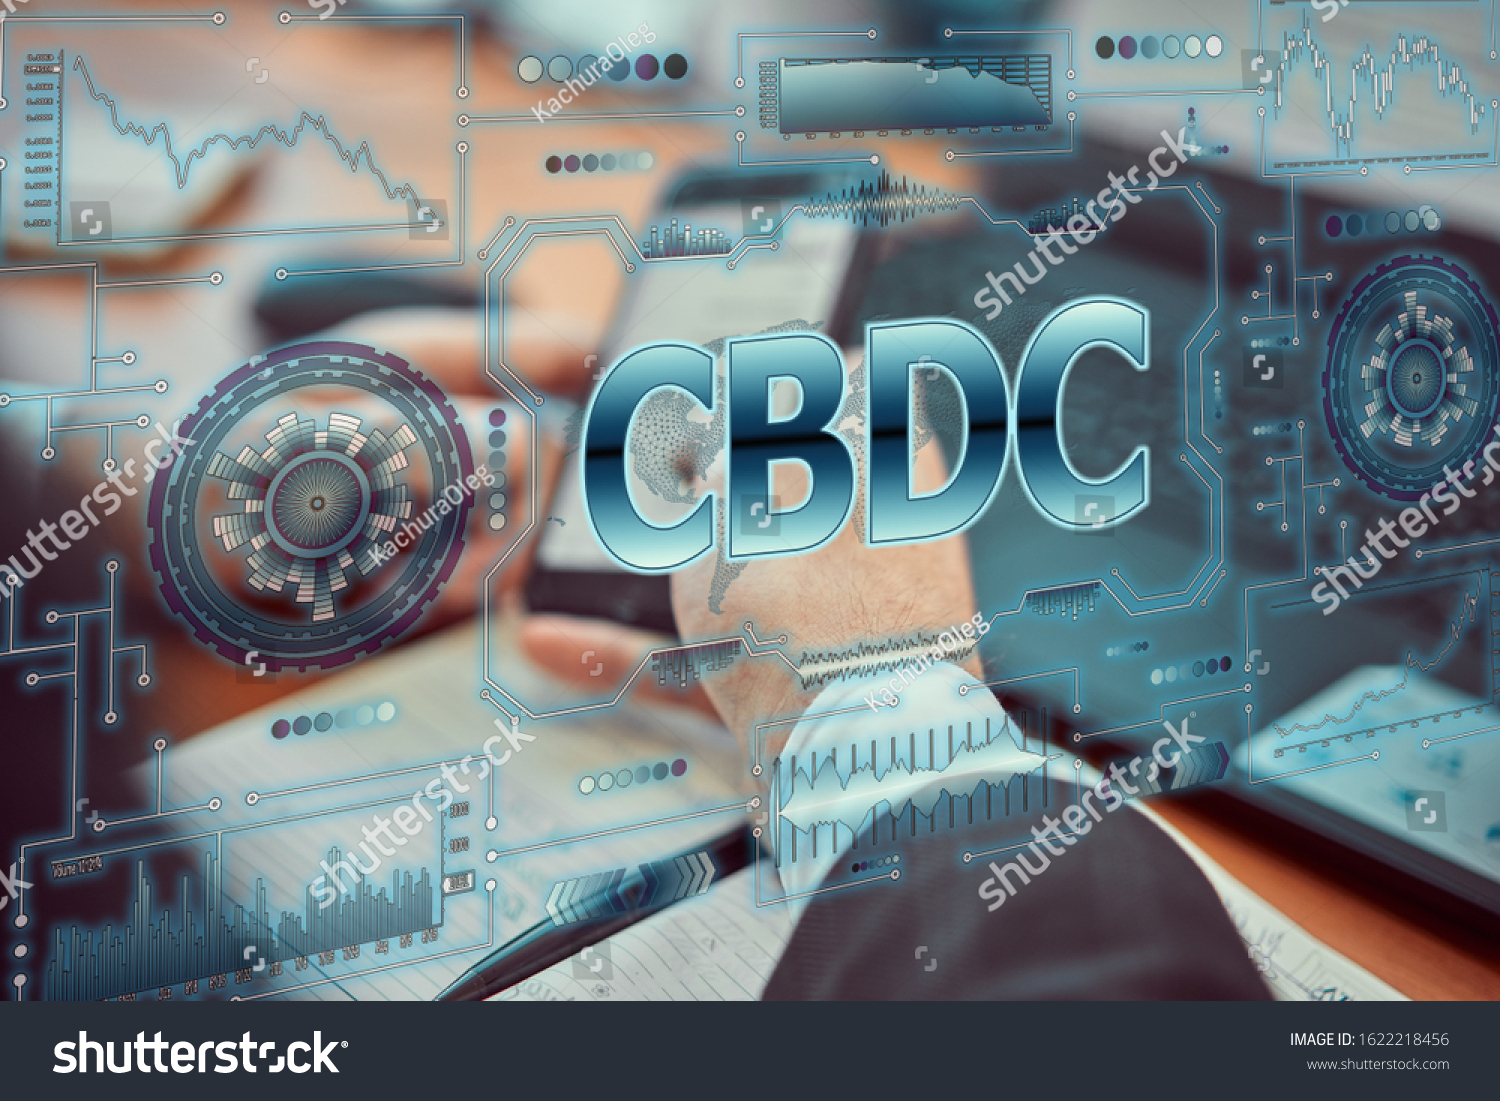 A young businessman uses a futuristic smartphone with the latest holographic technology of augmented reality with the inscription "CBDC". Central bank digital currency concept #1622218456